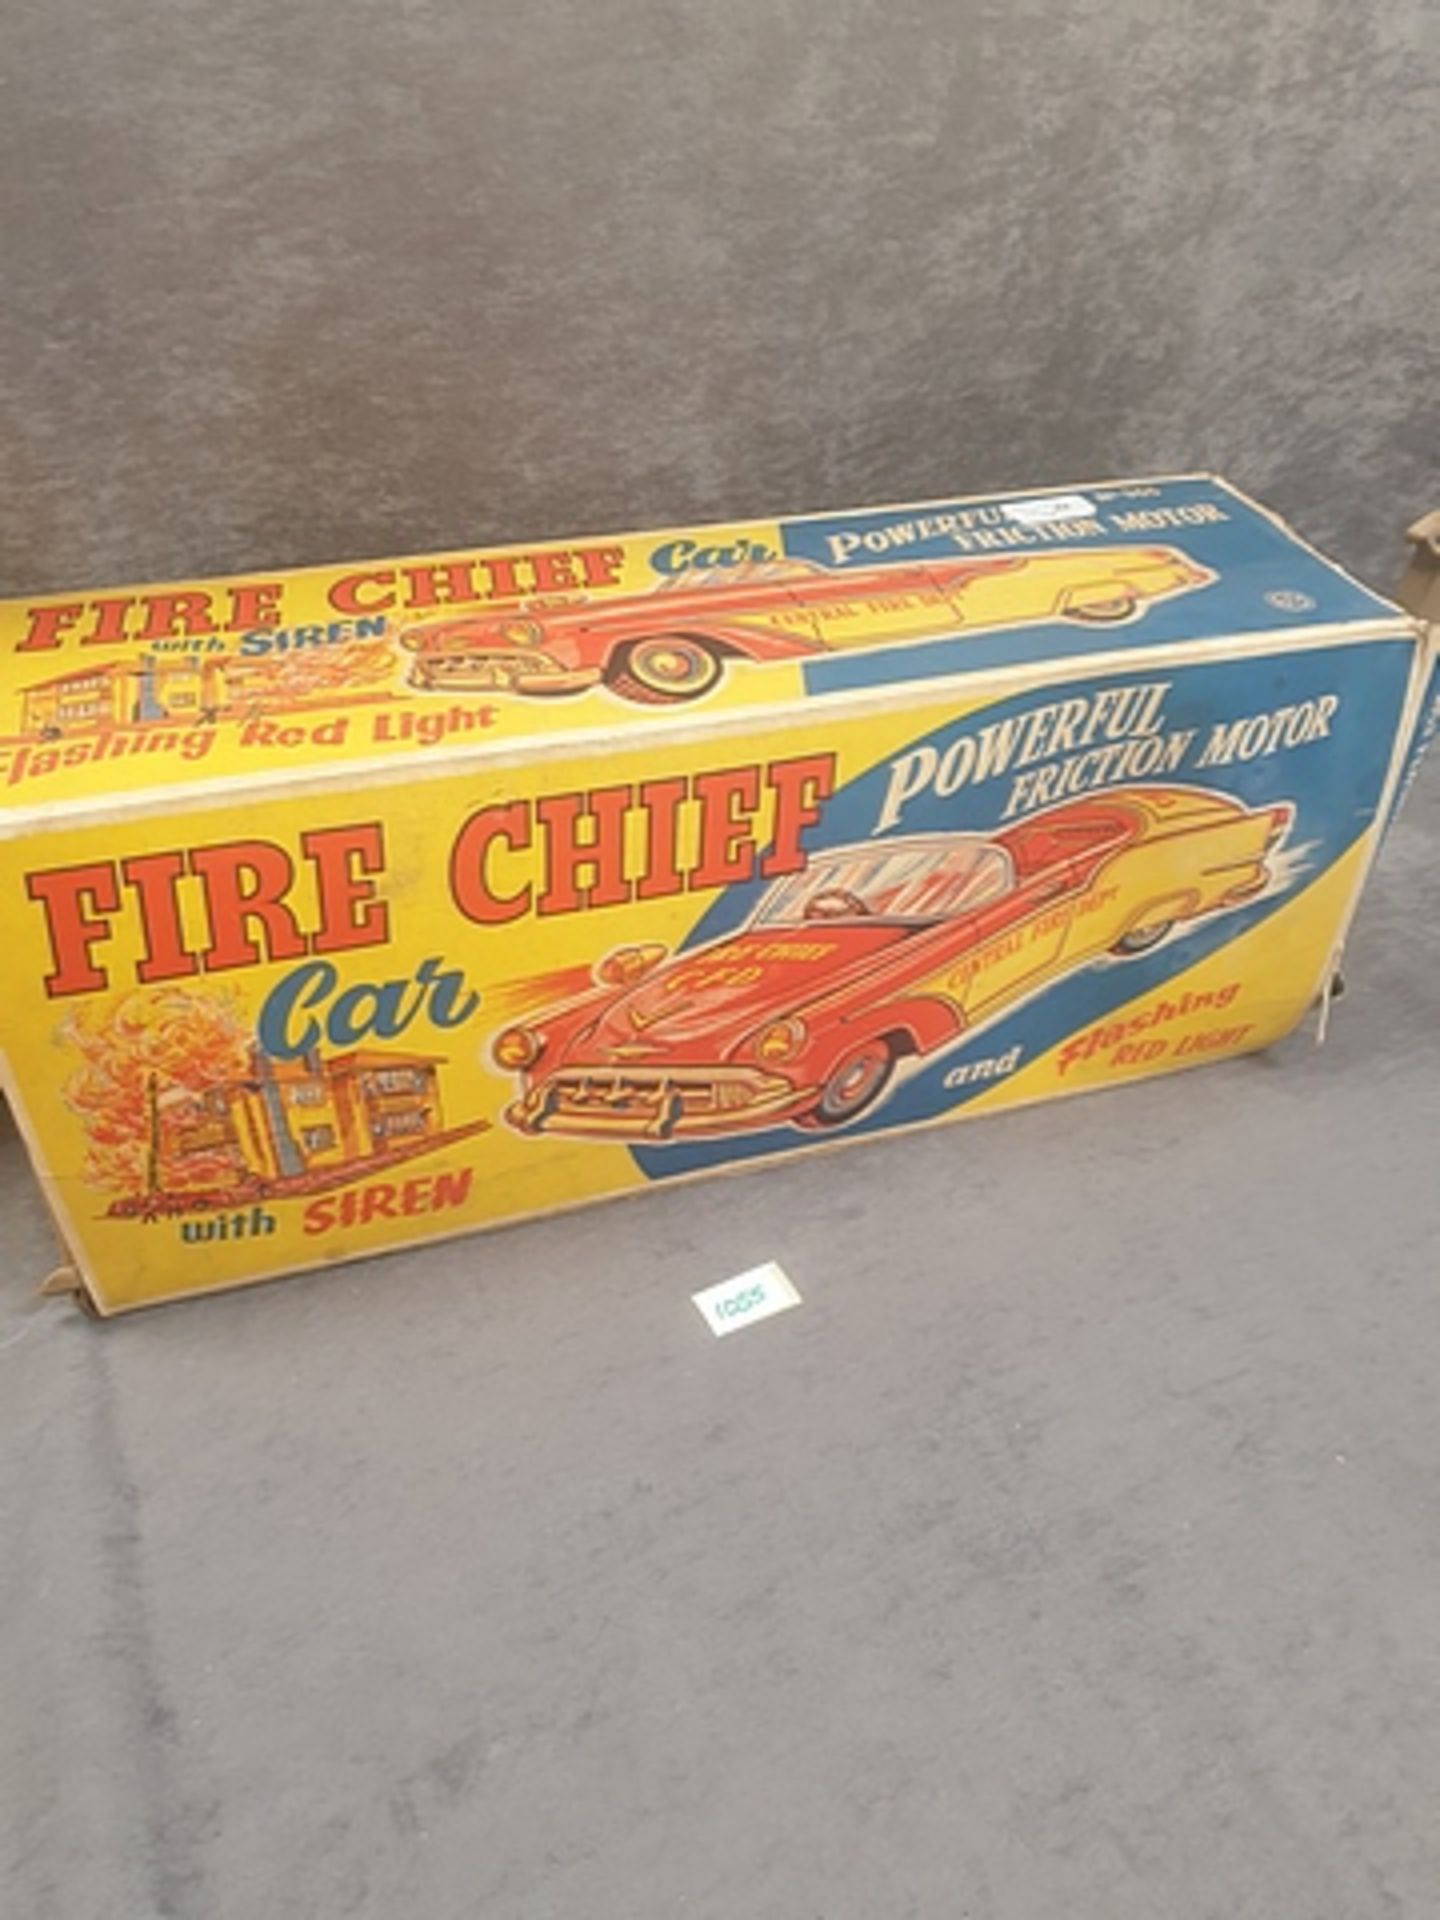 Marx Toys #965 Battery Operated Fire Chief Car With Siren, A Powerful Friction Motor And Flashing - Image 2 of 2